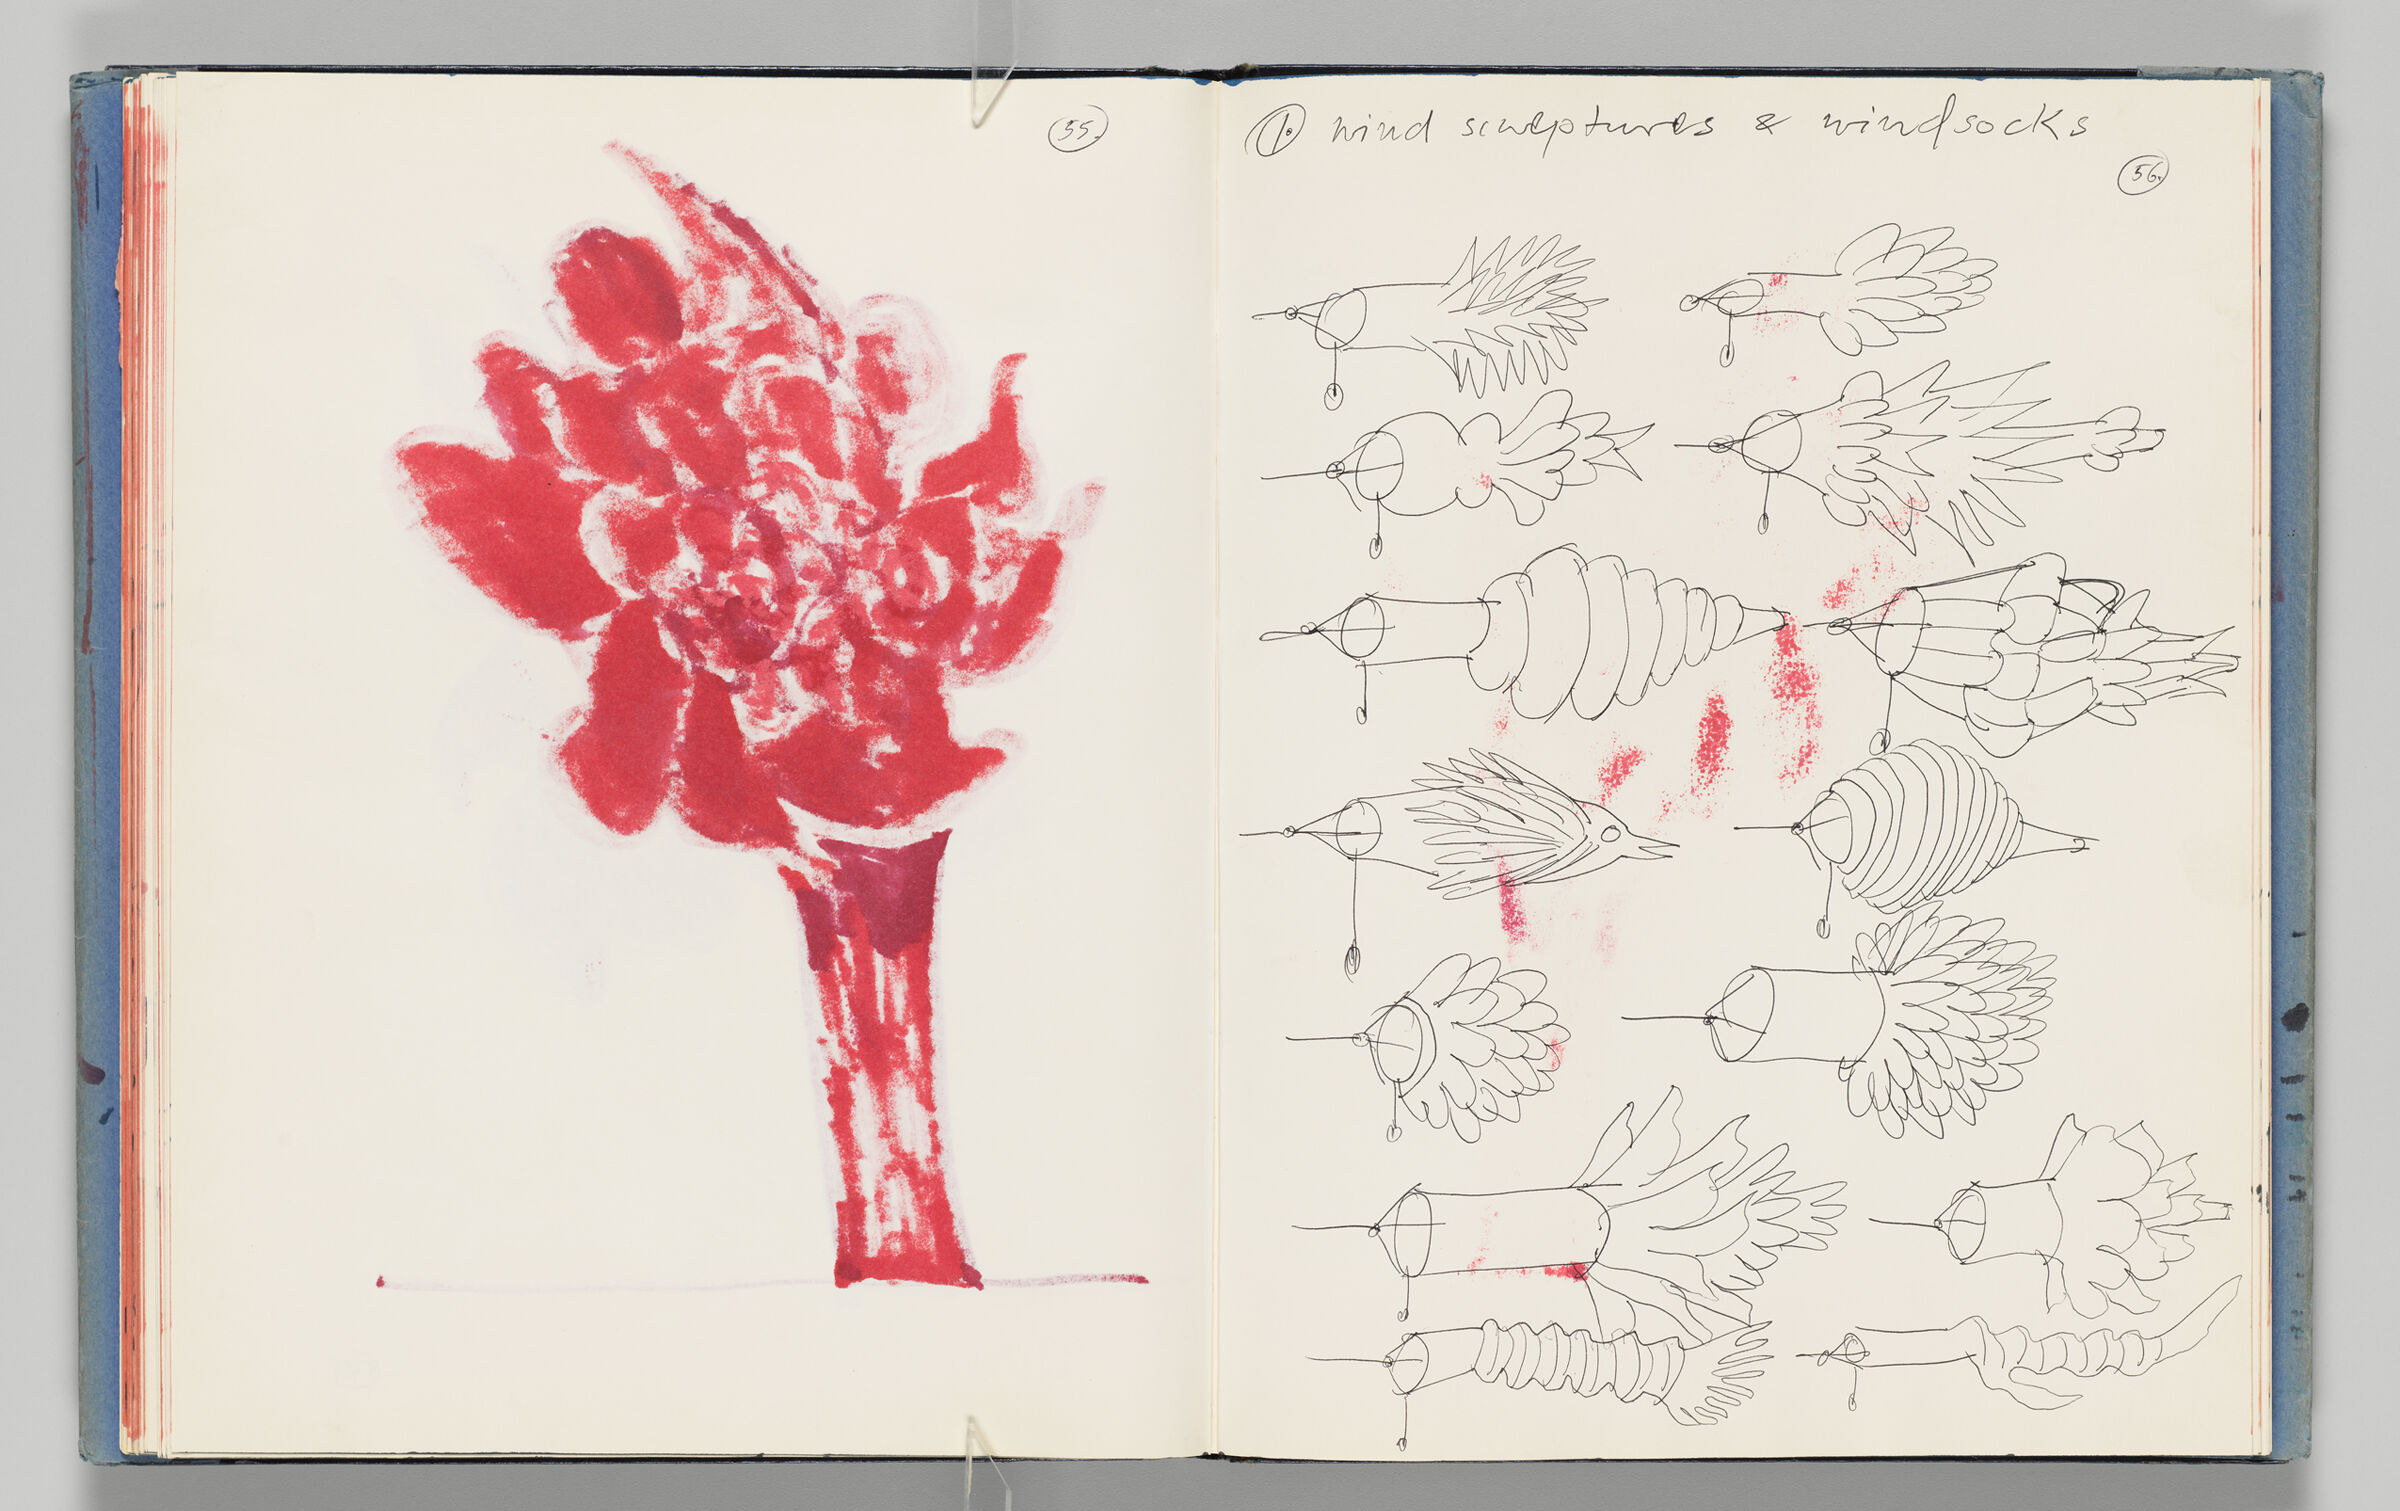 Untitled (Bleed-Through Of Previous Page With Page Number, Left Page); Untitled (Designs For 